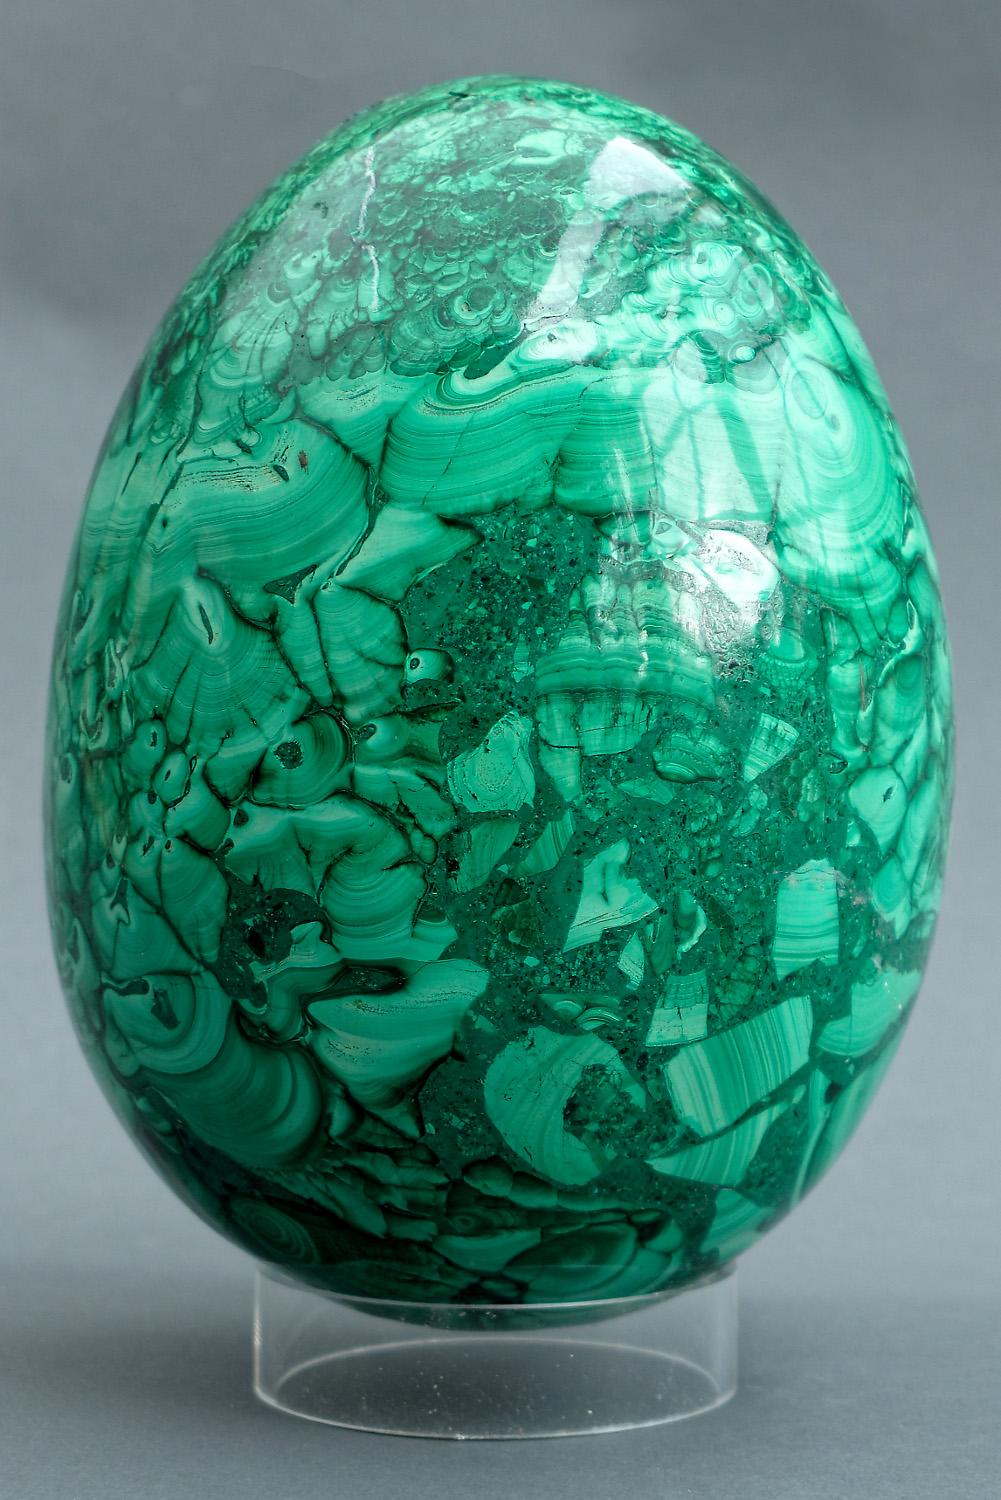 Impressive and large Russian malachite egg, carved from the solid. A timeless yet historic decorative object, which is a great addition to any sophisticated interior decoration. This unique and unusual object functions as a great eyecatcher; a